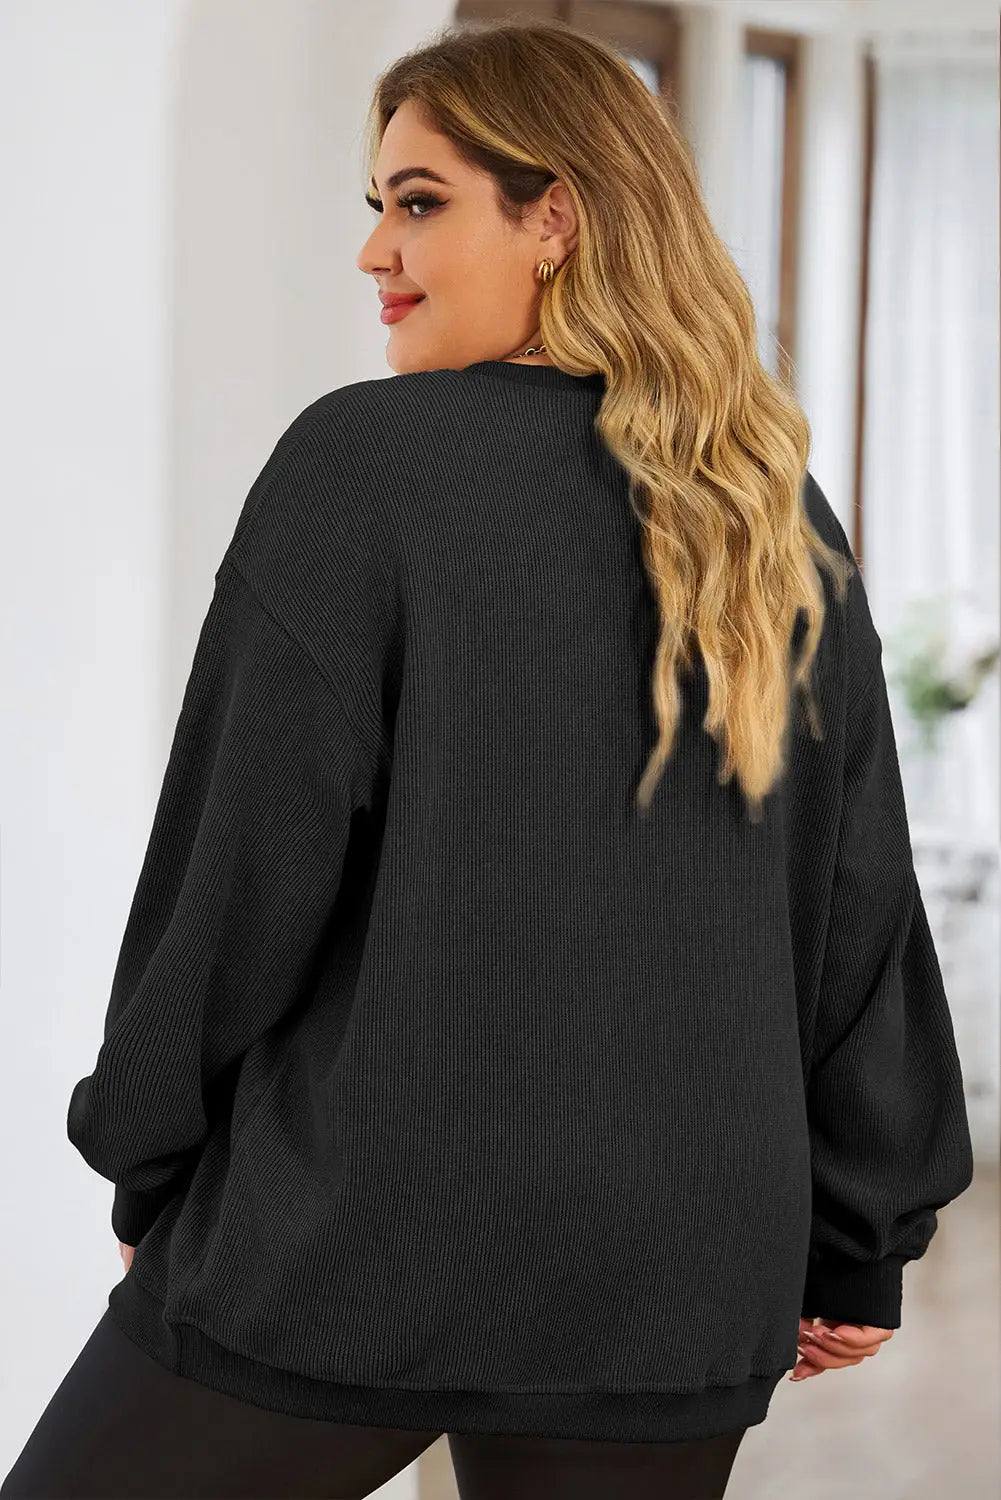 Black solid ribbed knit round neck pullover sweatshirt - tops